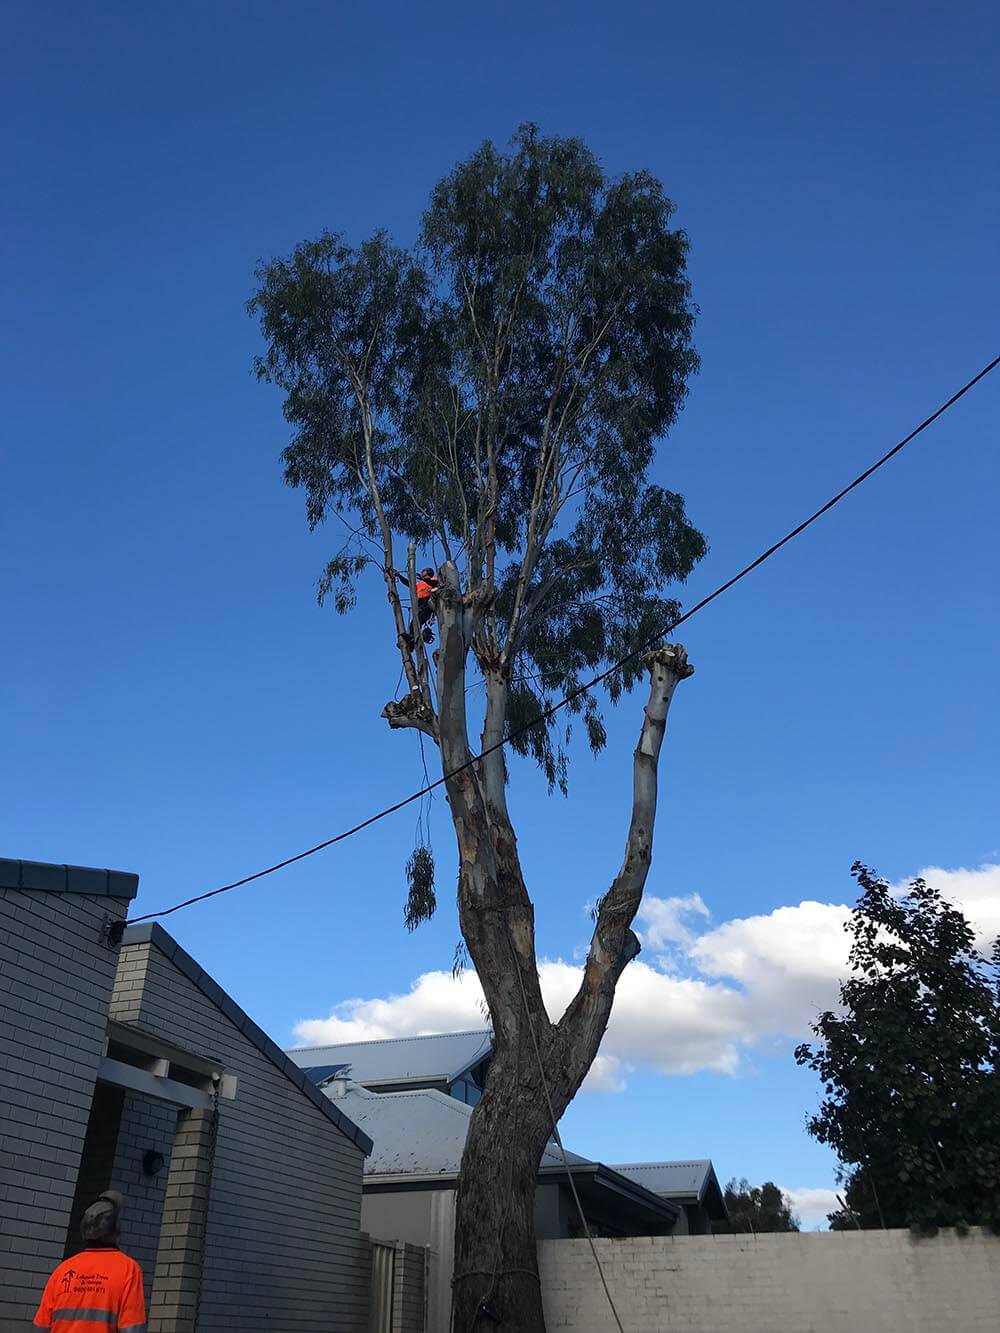 Arborists high up in tree